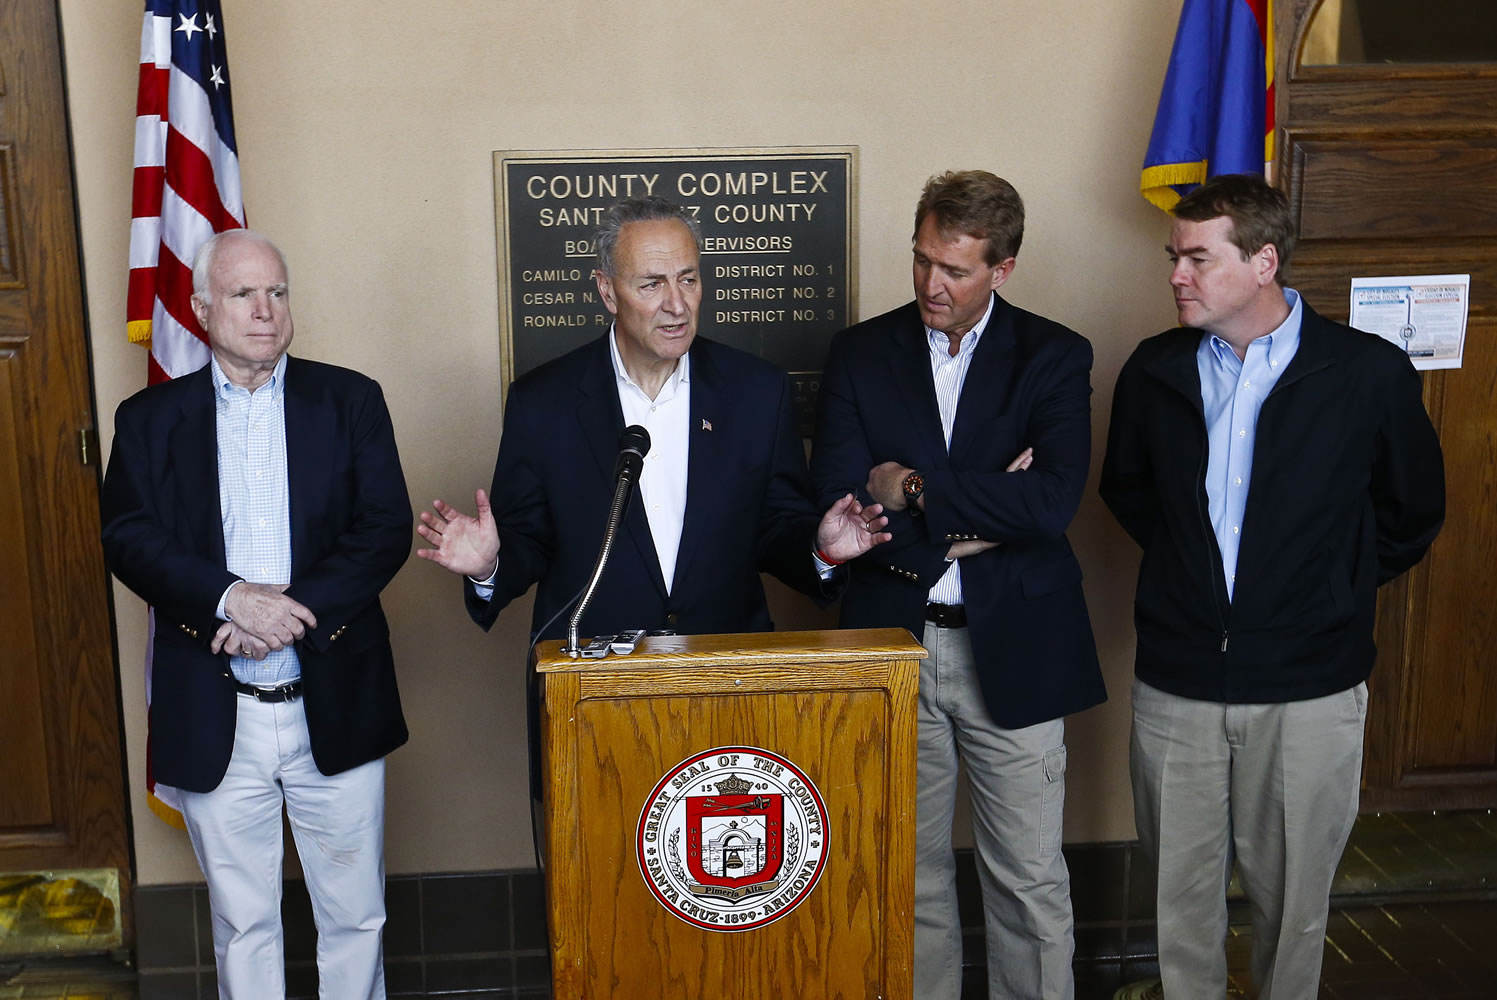 From left, Sen. John McCain, R-Ariz., Sen. Chuck Schumer, D-N.Y., Sen. Jeff Flake, R-Ariz., and Sen. Michael Bennett, D-Colo., address the media during a news conference after their tour of the Mexico border with the United States on March 27 in Nogales, Ariz.